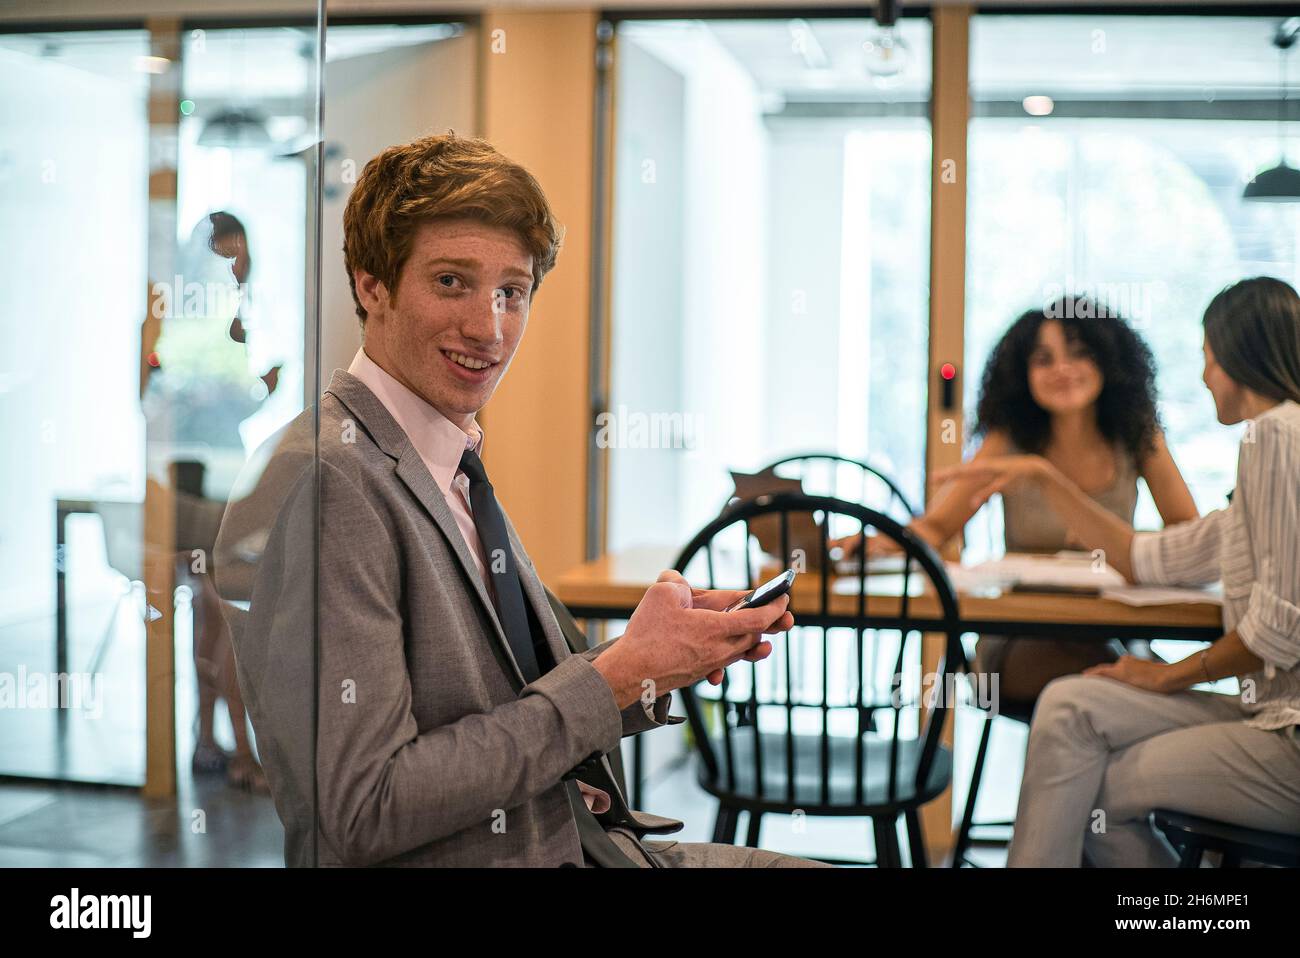 Smiling businessman using smart phone in office Stock Photo